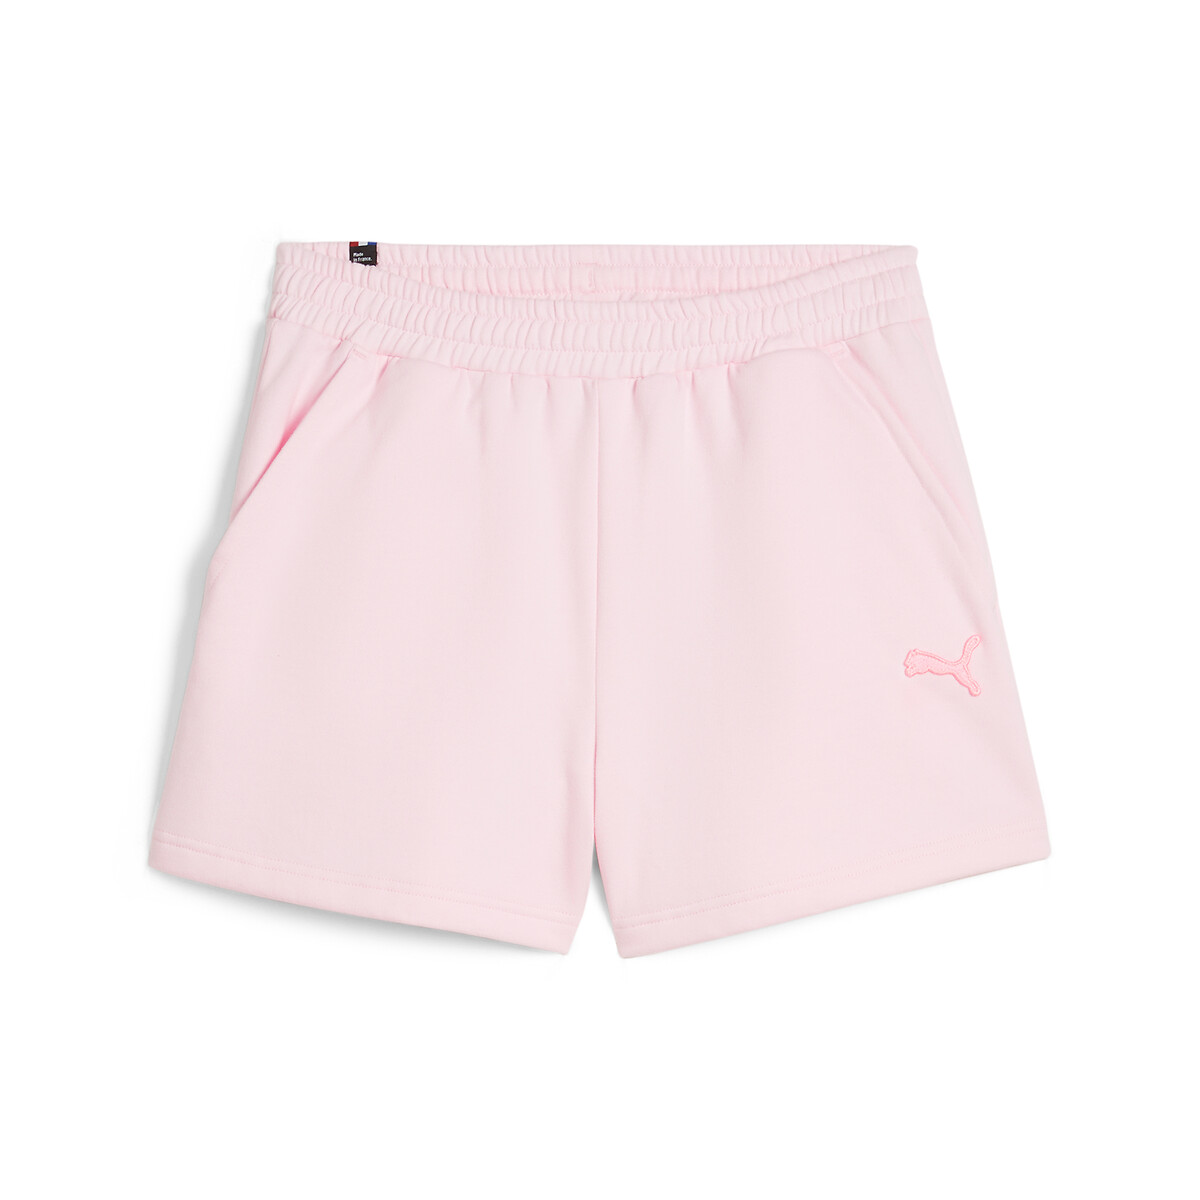 Image of Better Essentials 5" Shorts in Cotton, Made in France